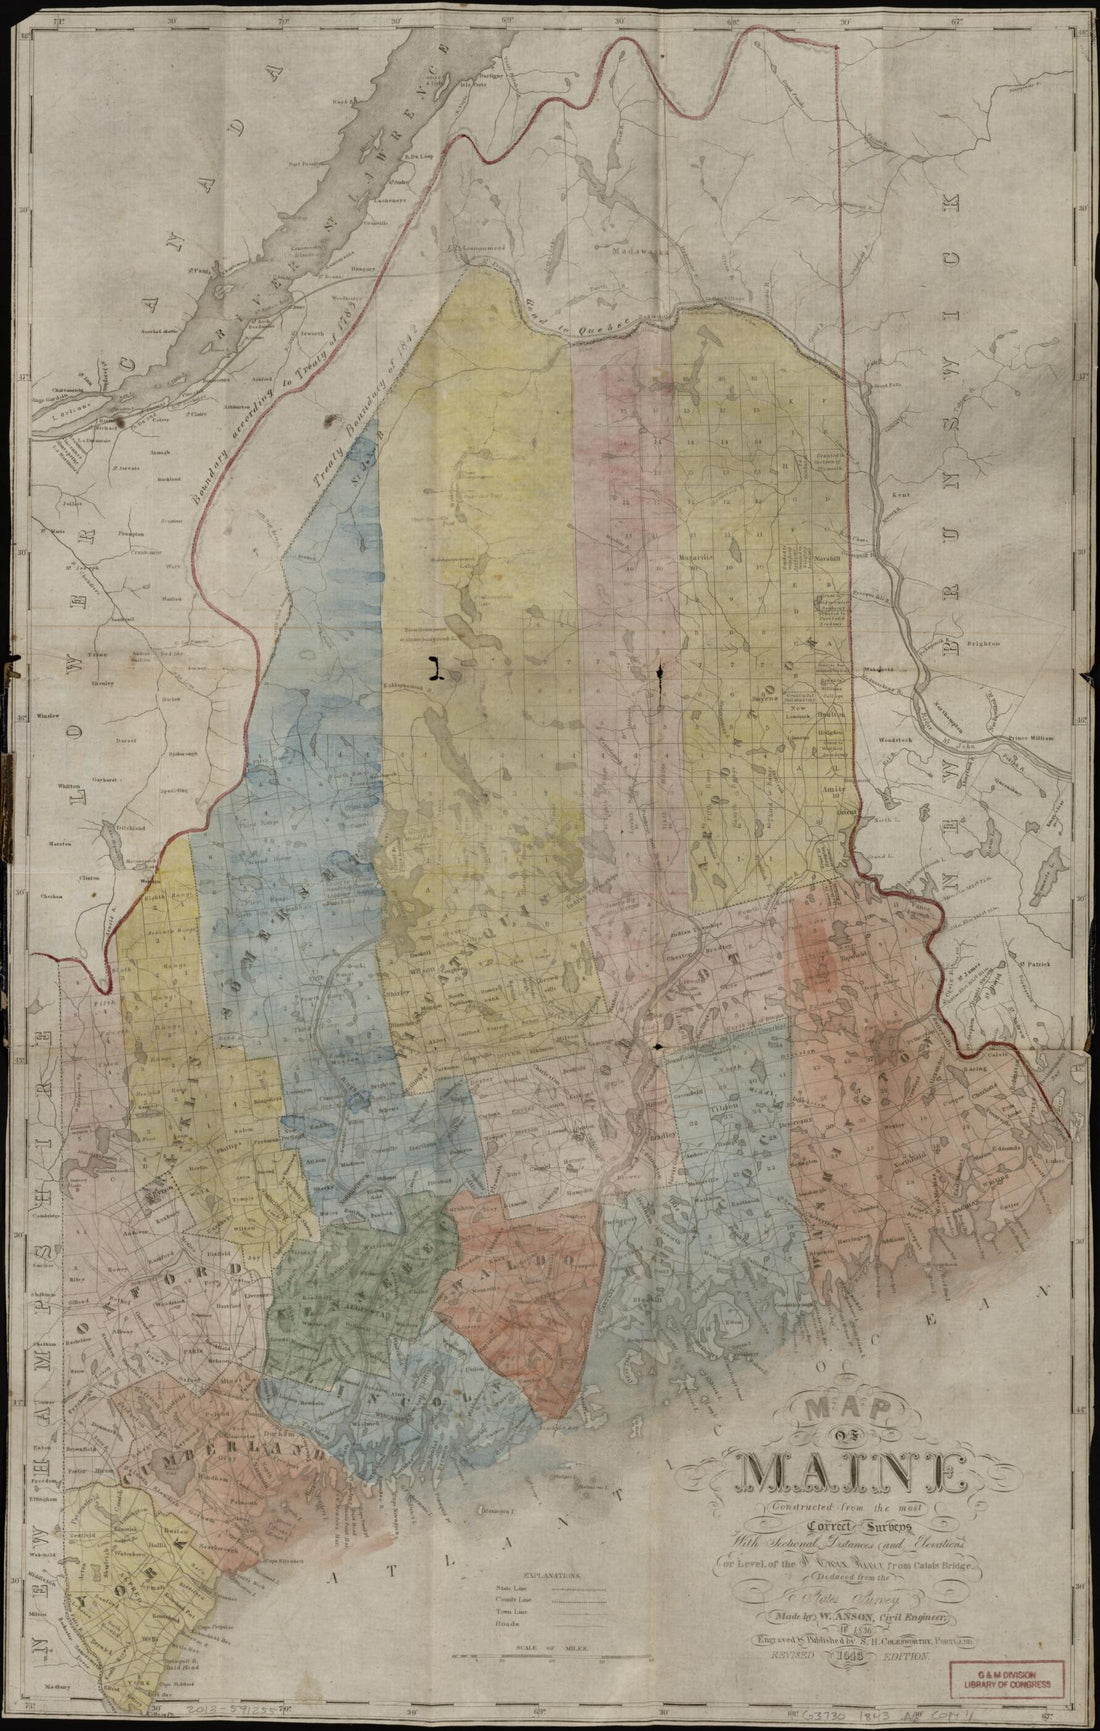 This old map of Map of Maine : Constructed from the Most Correct Surveys With Sectional Distances and Elevations, Or Level, of the St. Croix River from Calais Bridge Deduced from the States Survey from 1843 was created by W. Anson, Samuel Hodgson Colesworthy in 1843